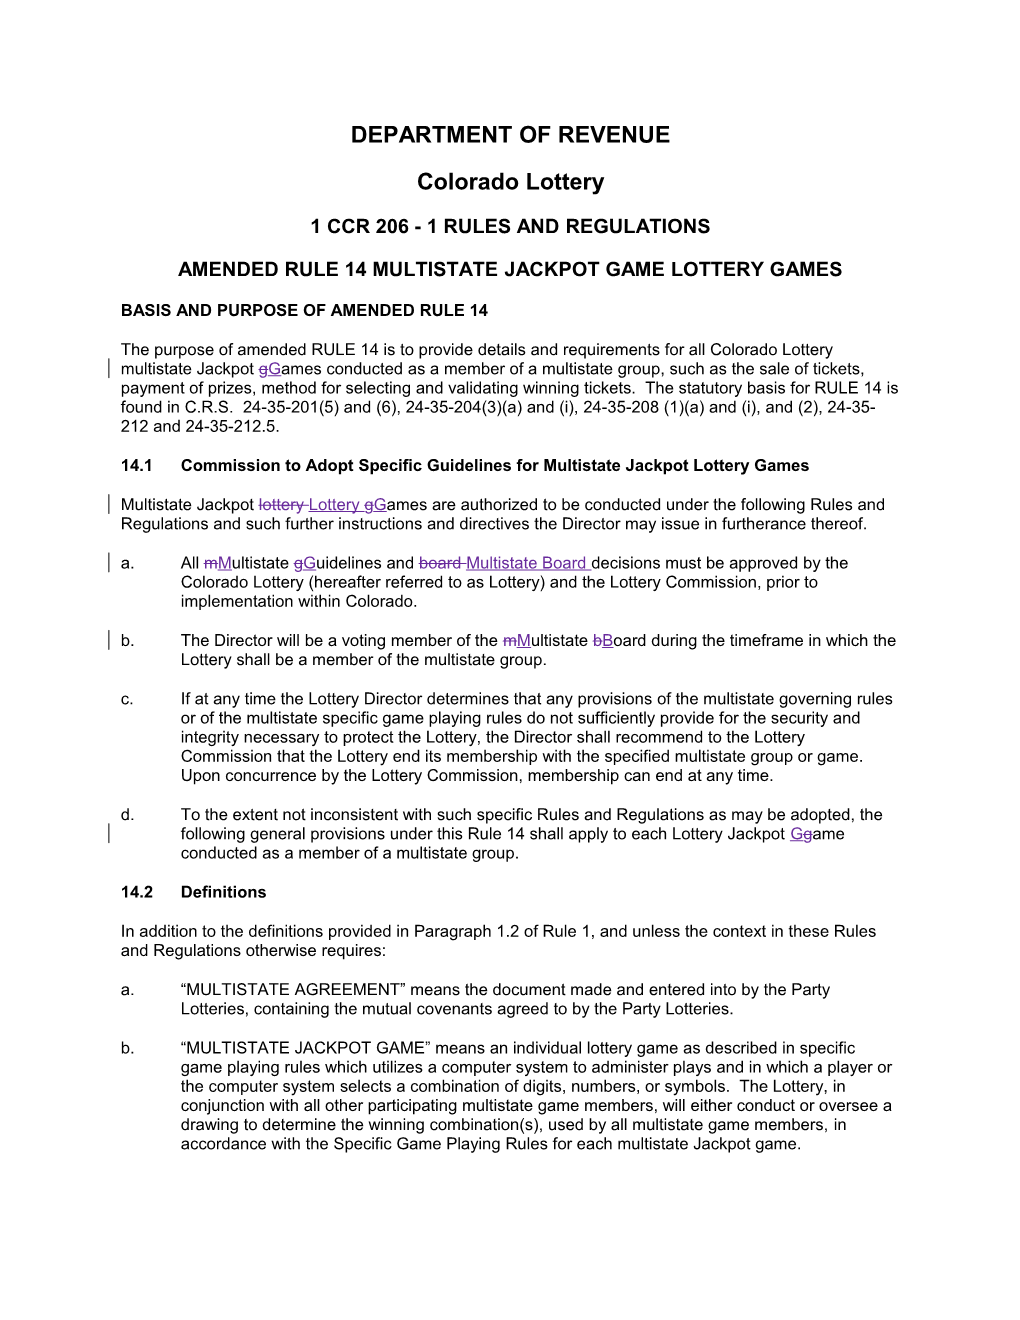 Amended RULE 14 MULTISTATE JACKPOT GAME LOTTERY GAMES